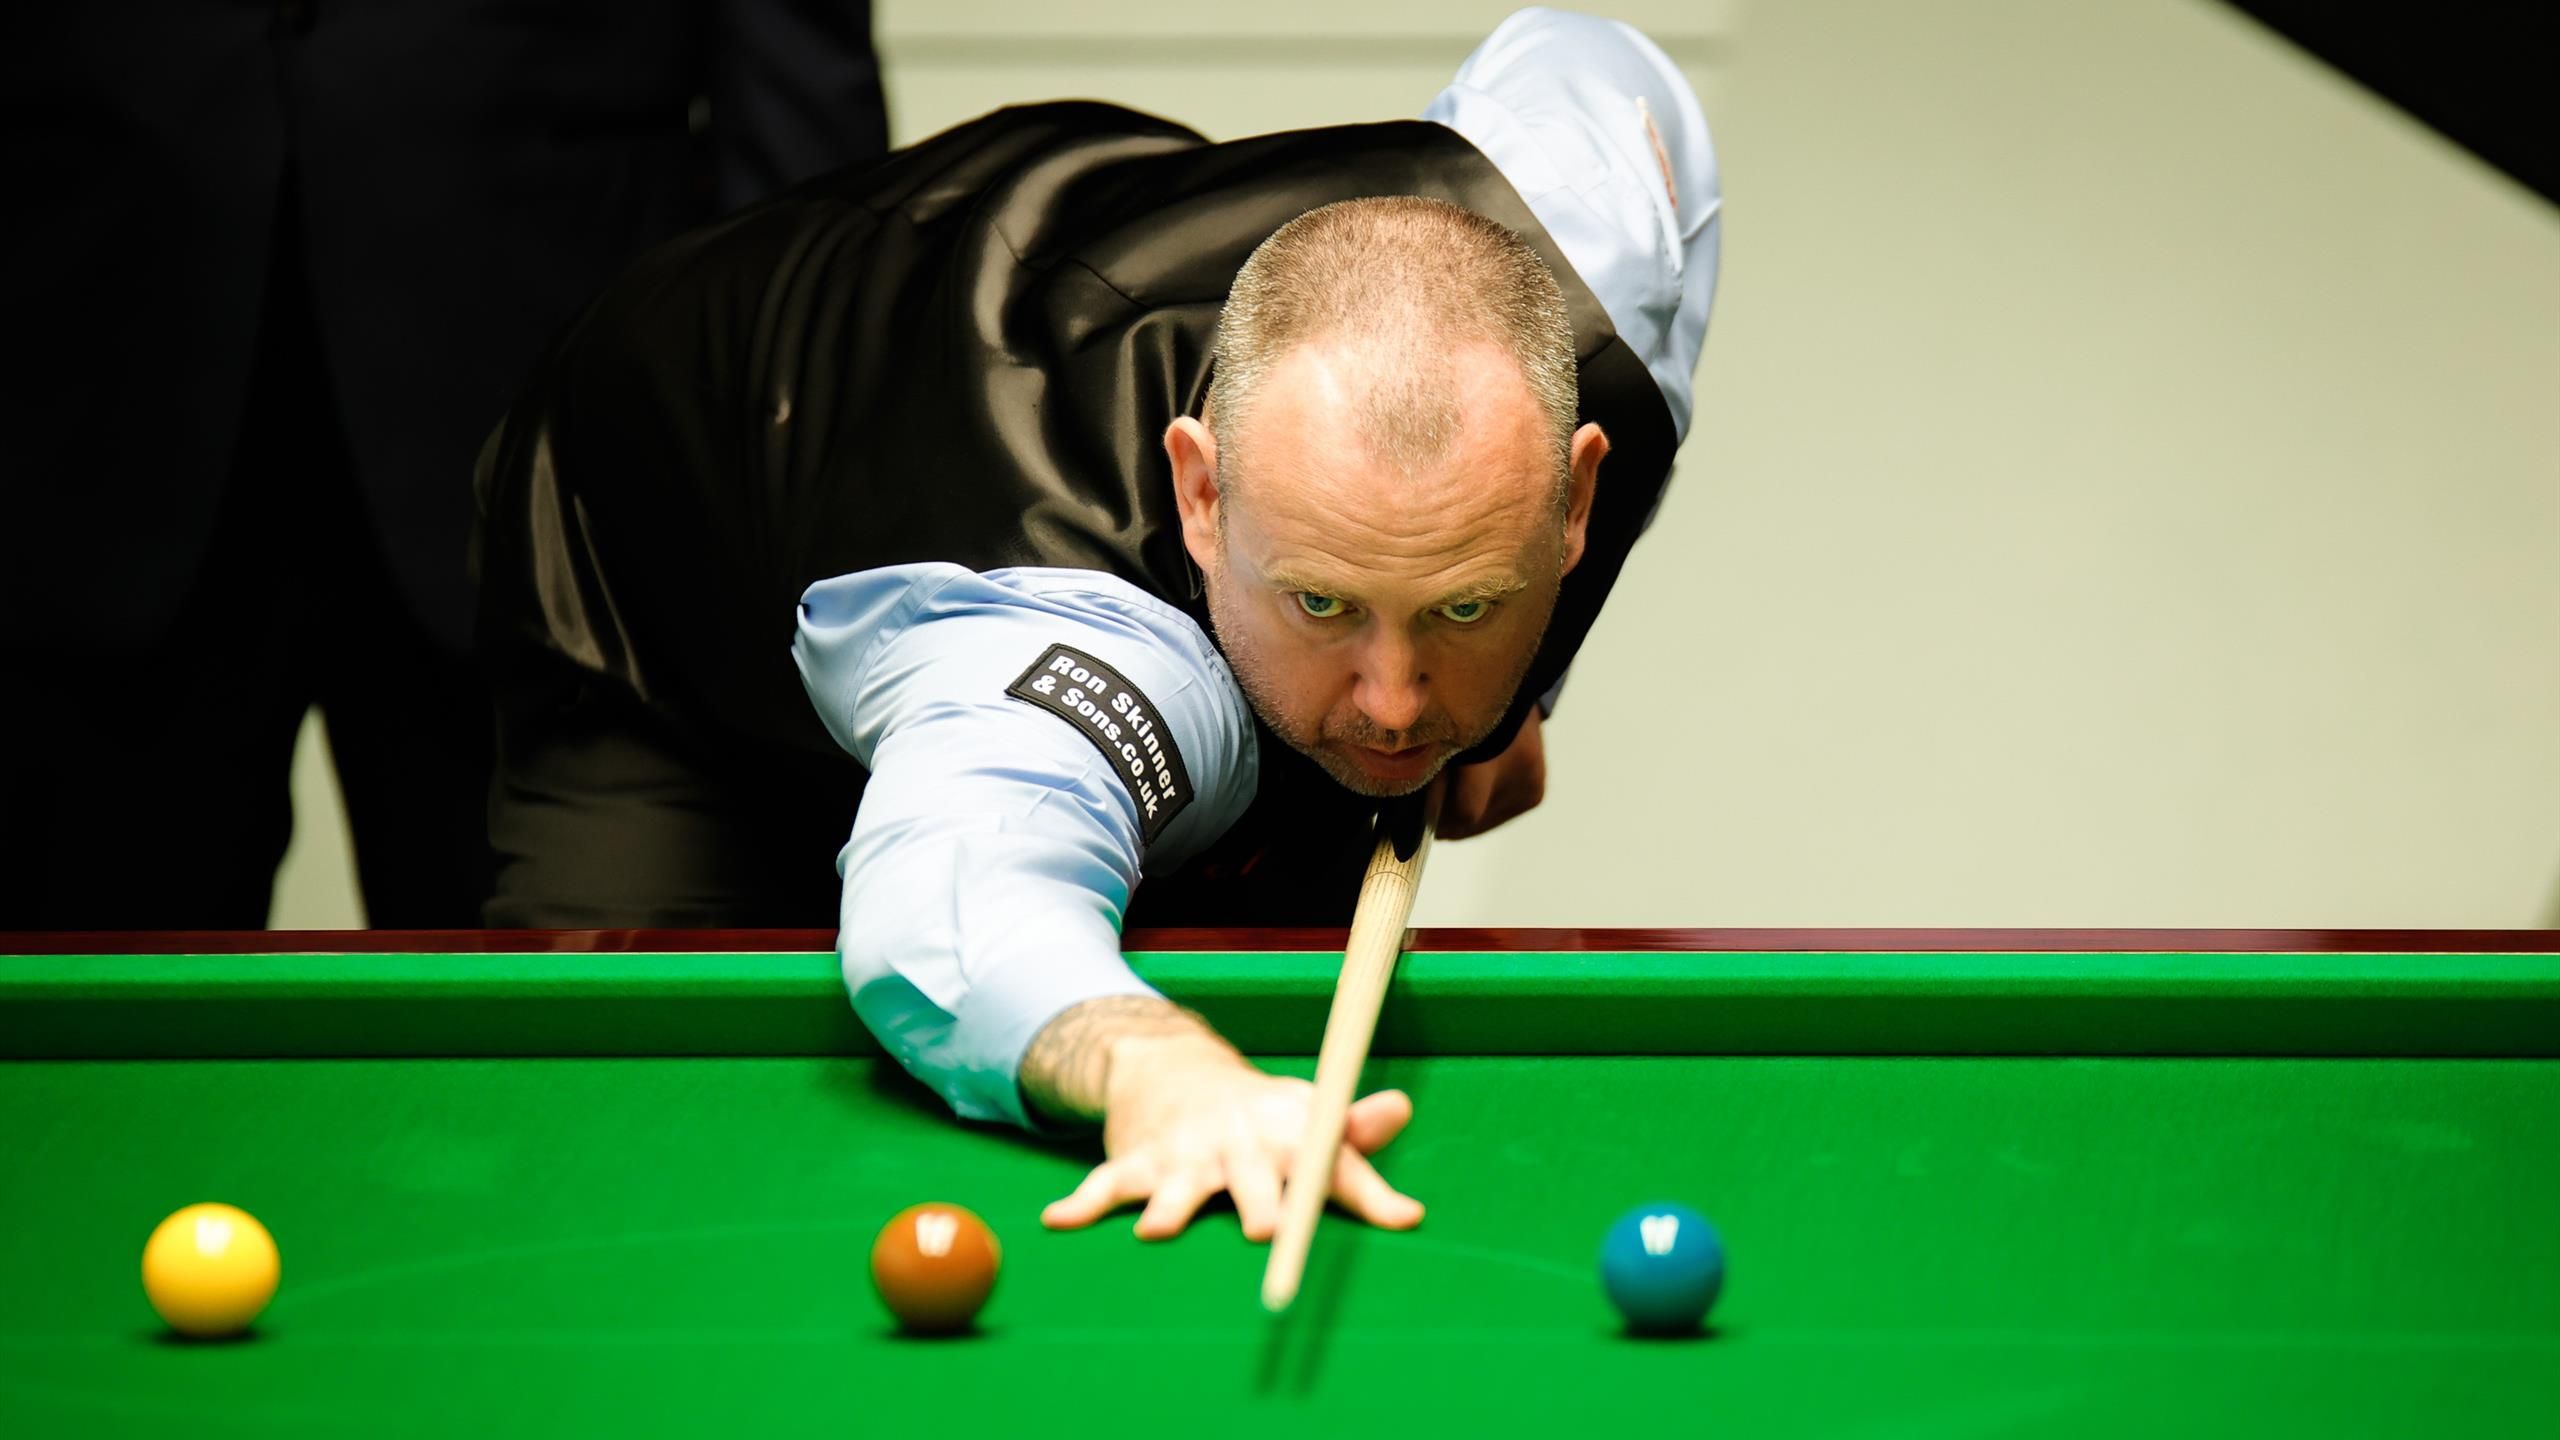 British Open snooker 2023 as it happened - Mark Williams and Ding Junhui through after more shocks